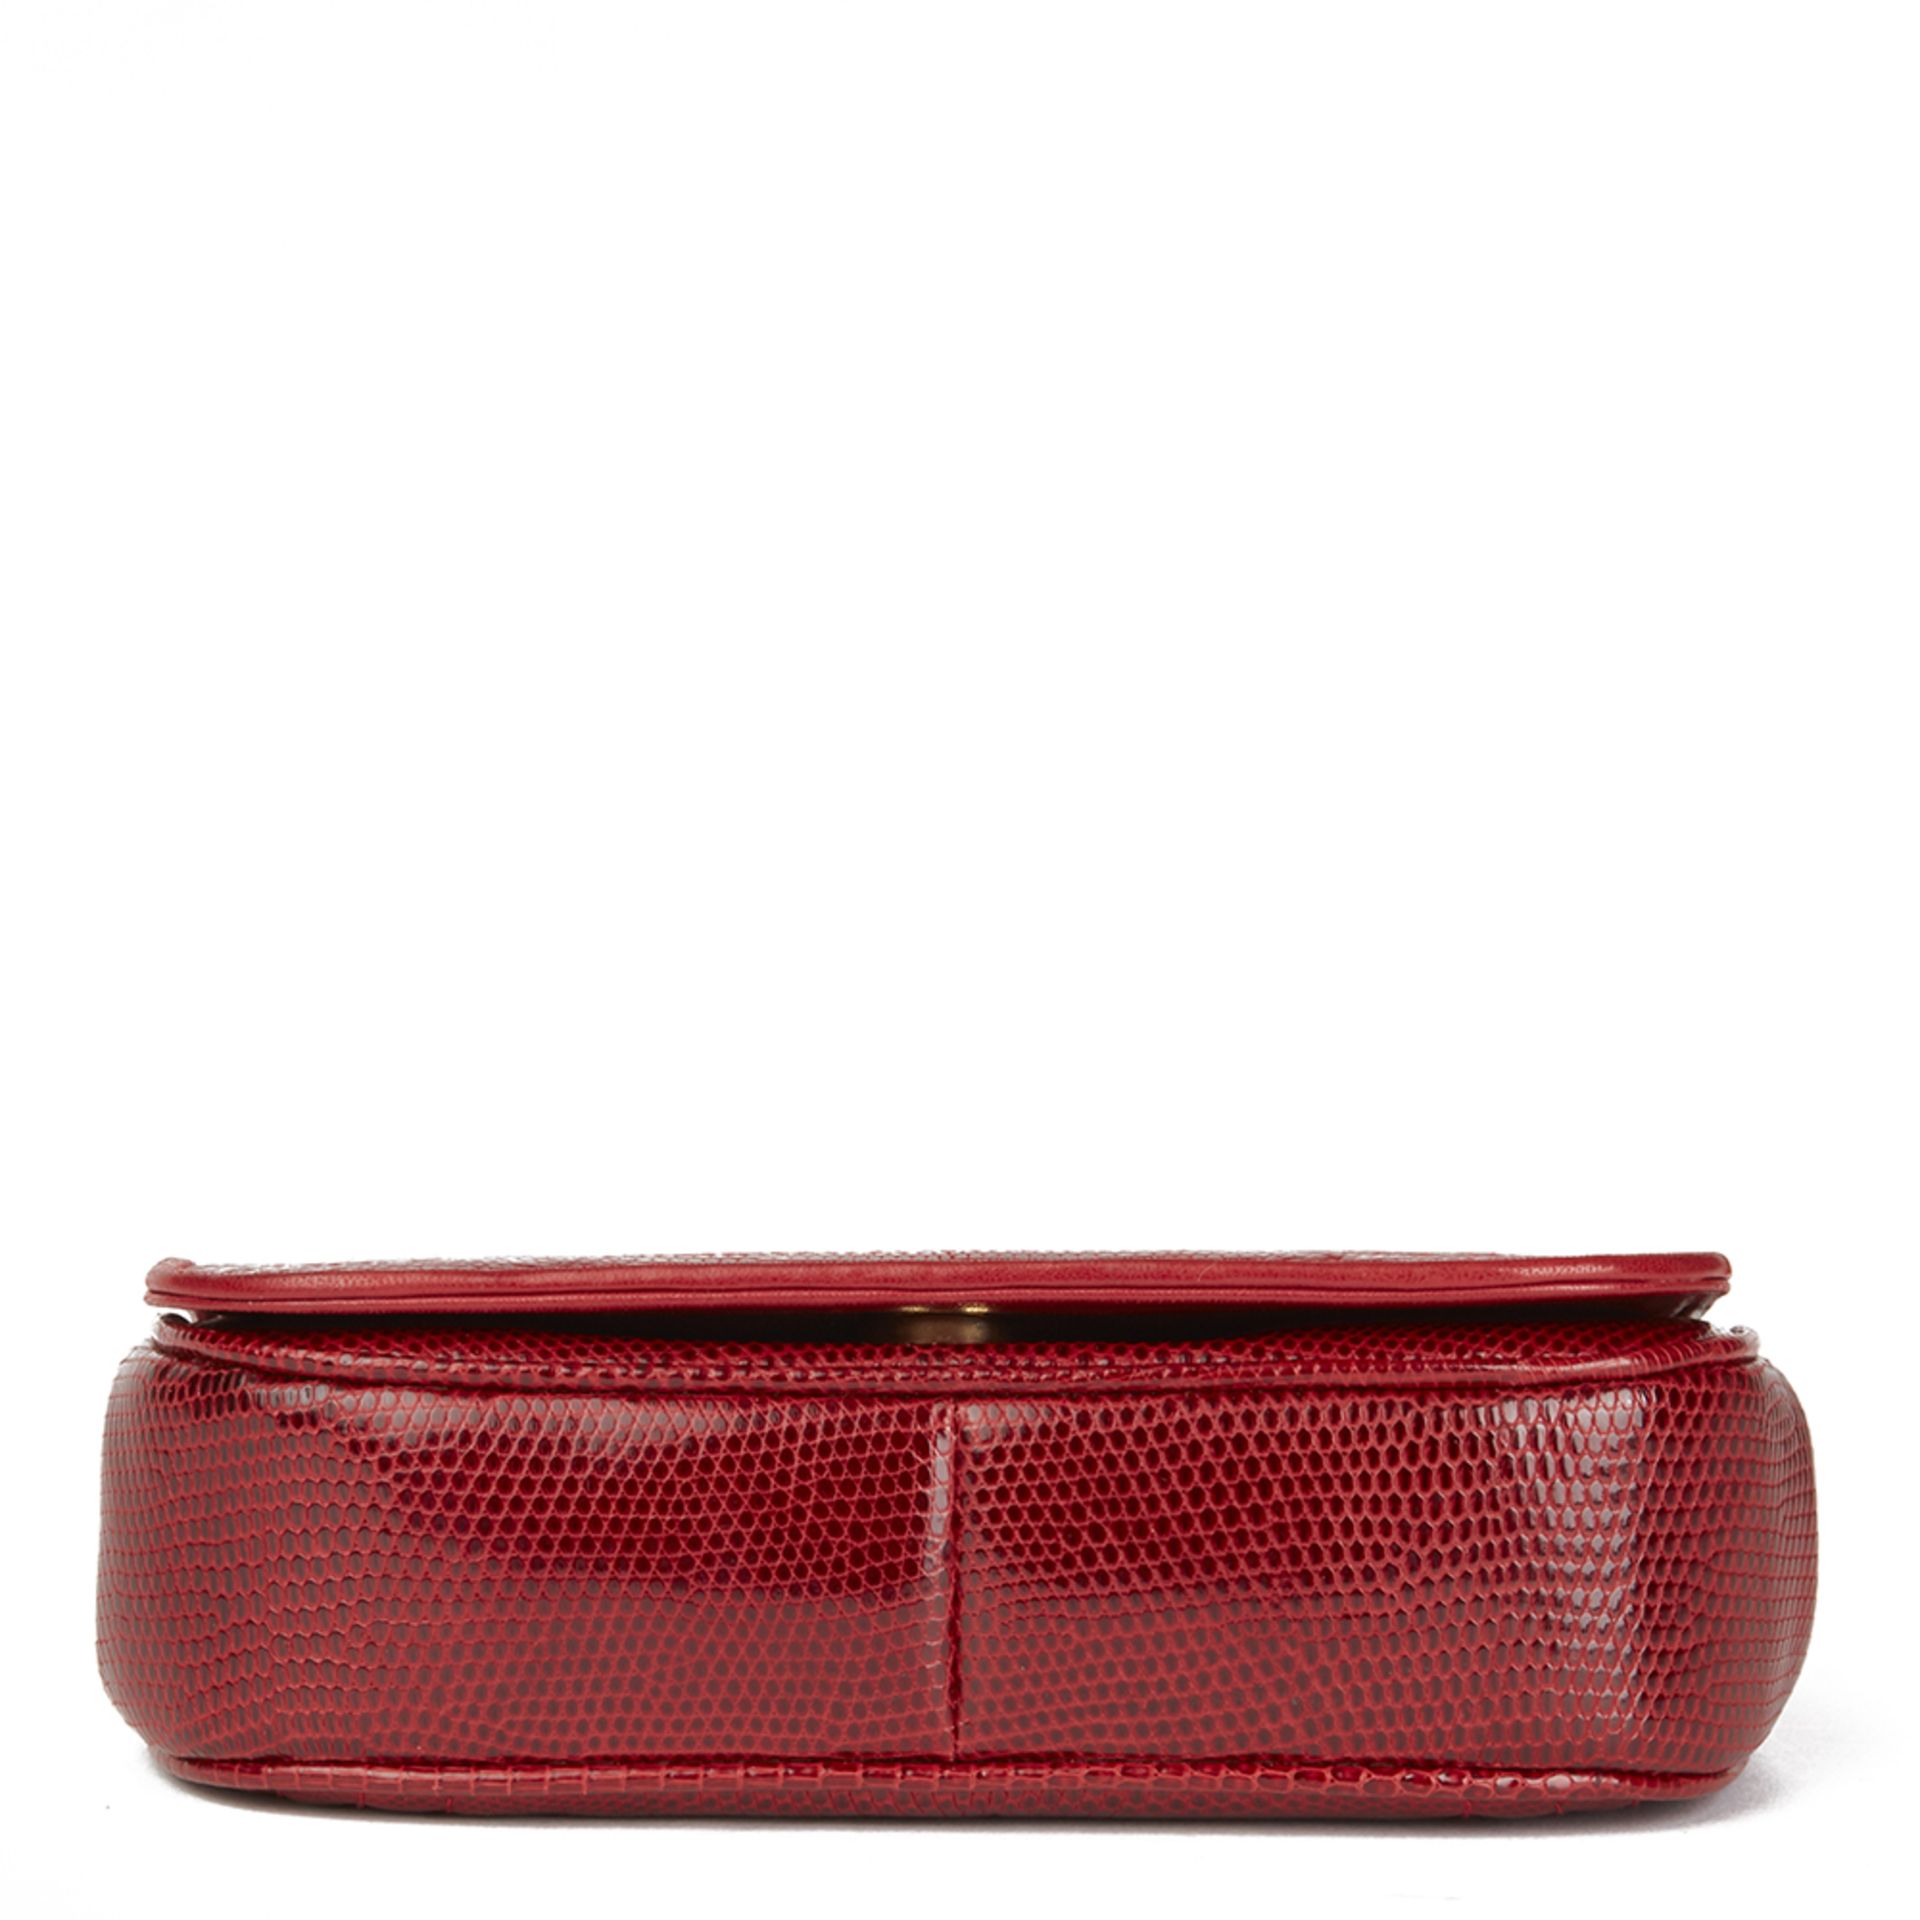 Chanel Red Lizard Leather Vintage Timeless Mini Flap Bag - Image 9 of 12